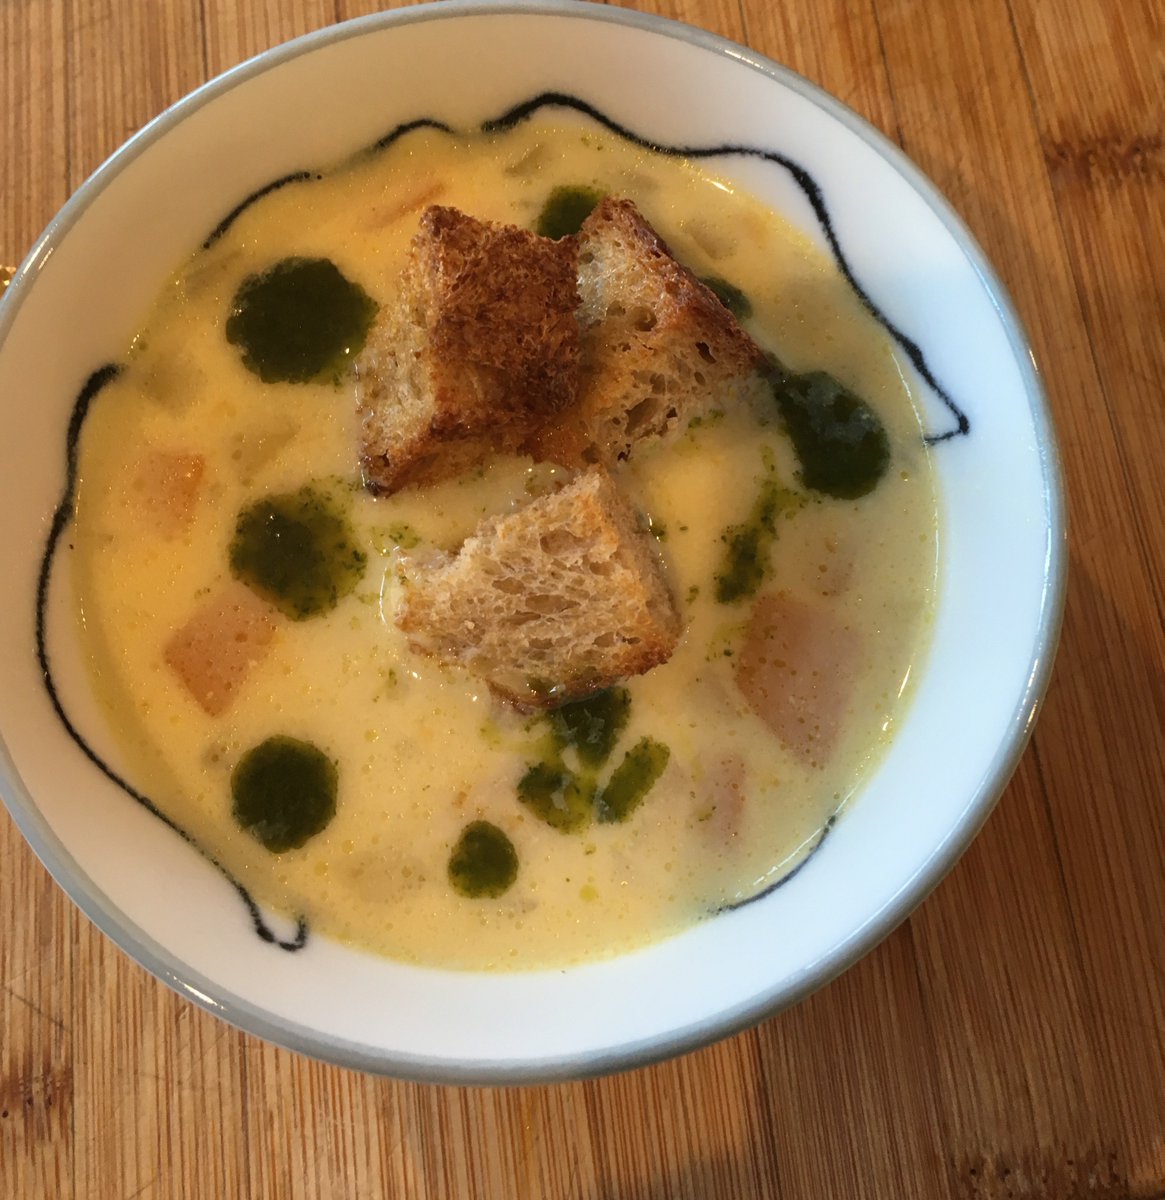 I made corn chowder with croutons and pesto (#vegan obviously)! Very yummy ???? https://t.co/qcjURUtYAx https://t.co/sIdULnWLwz